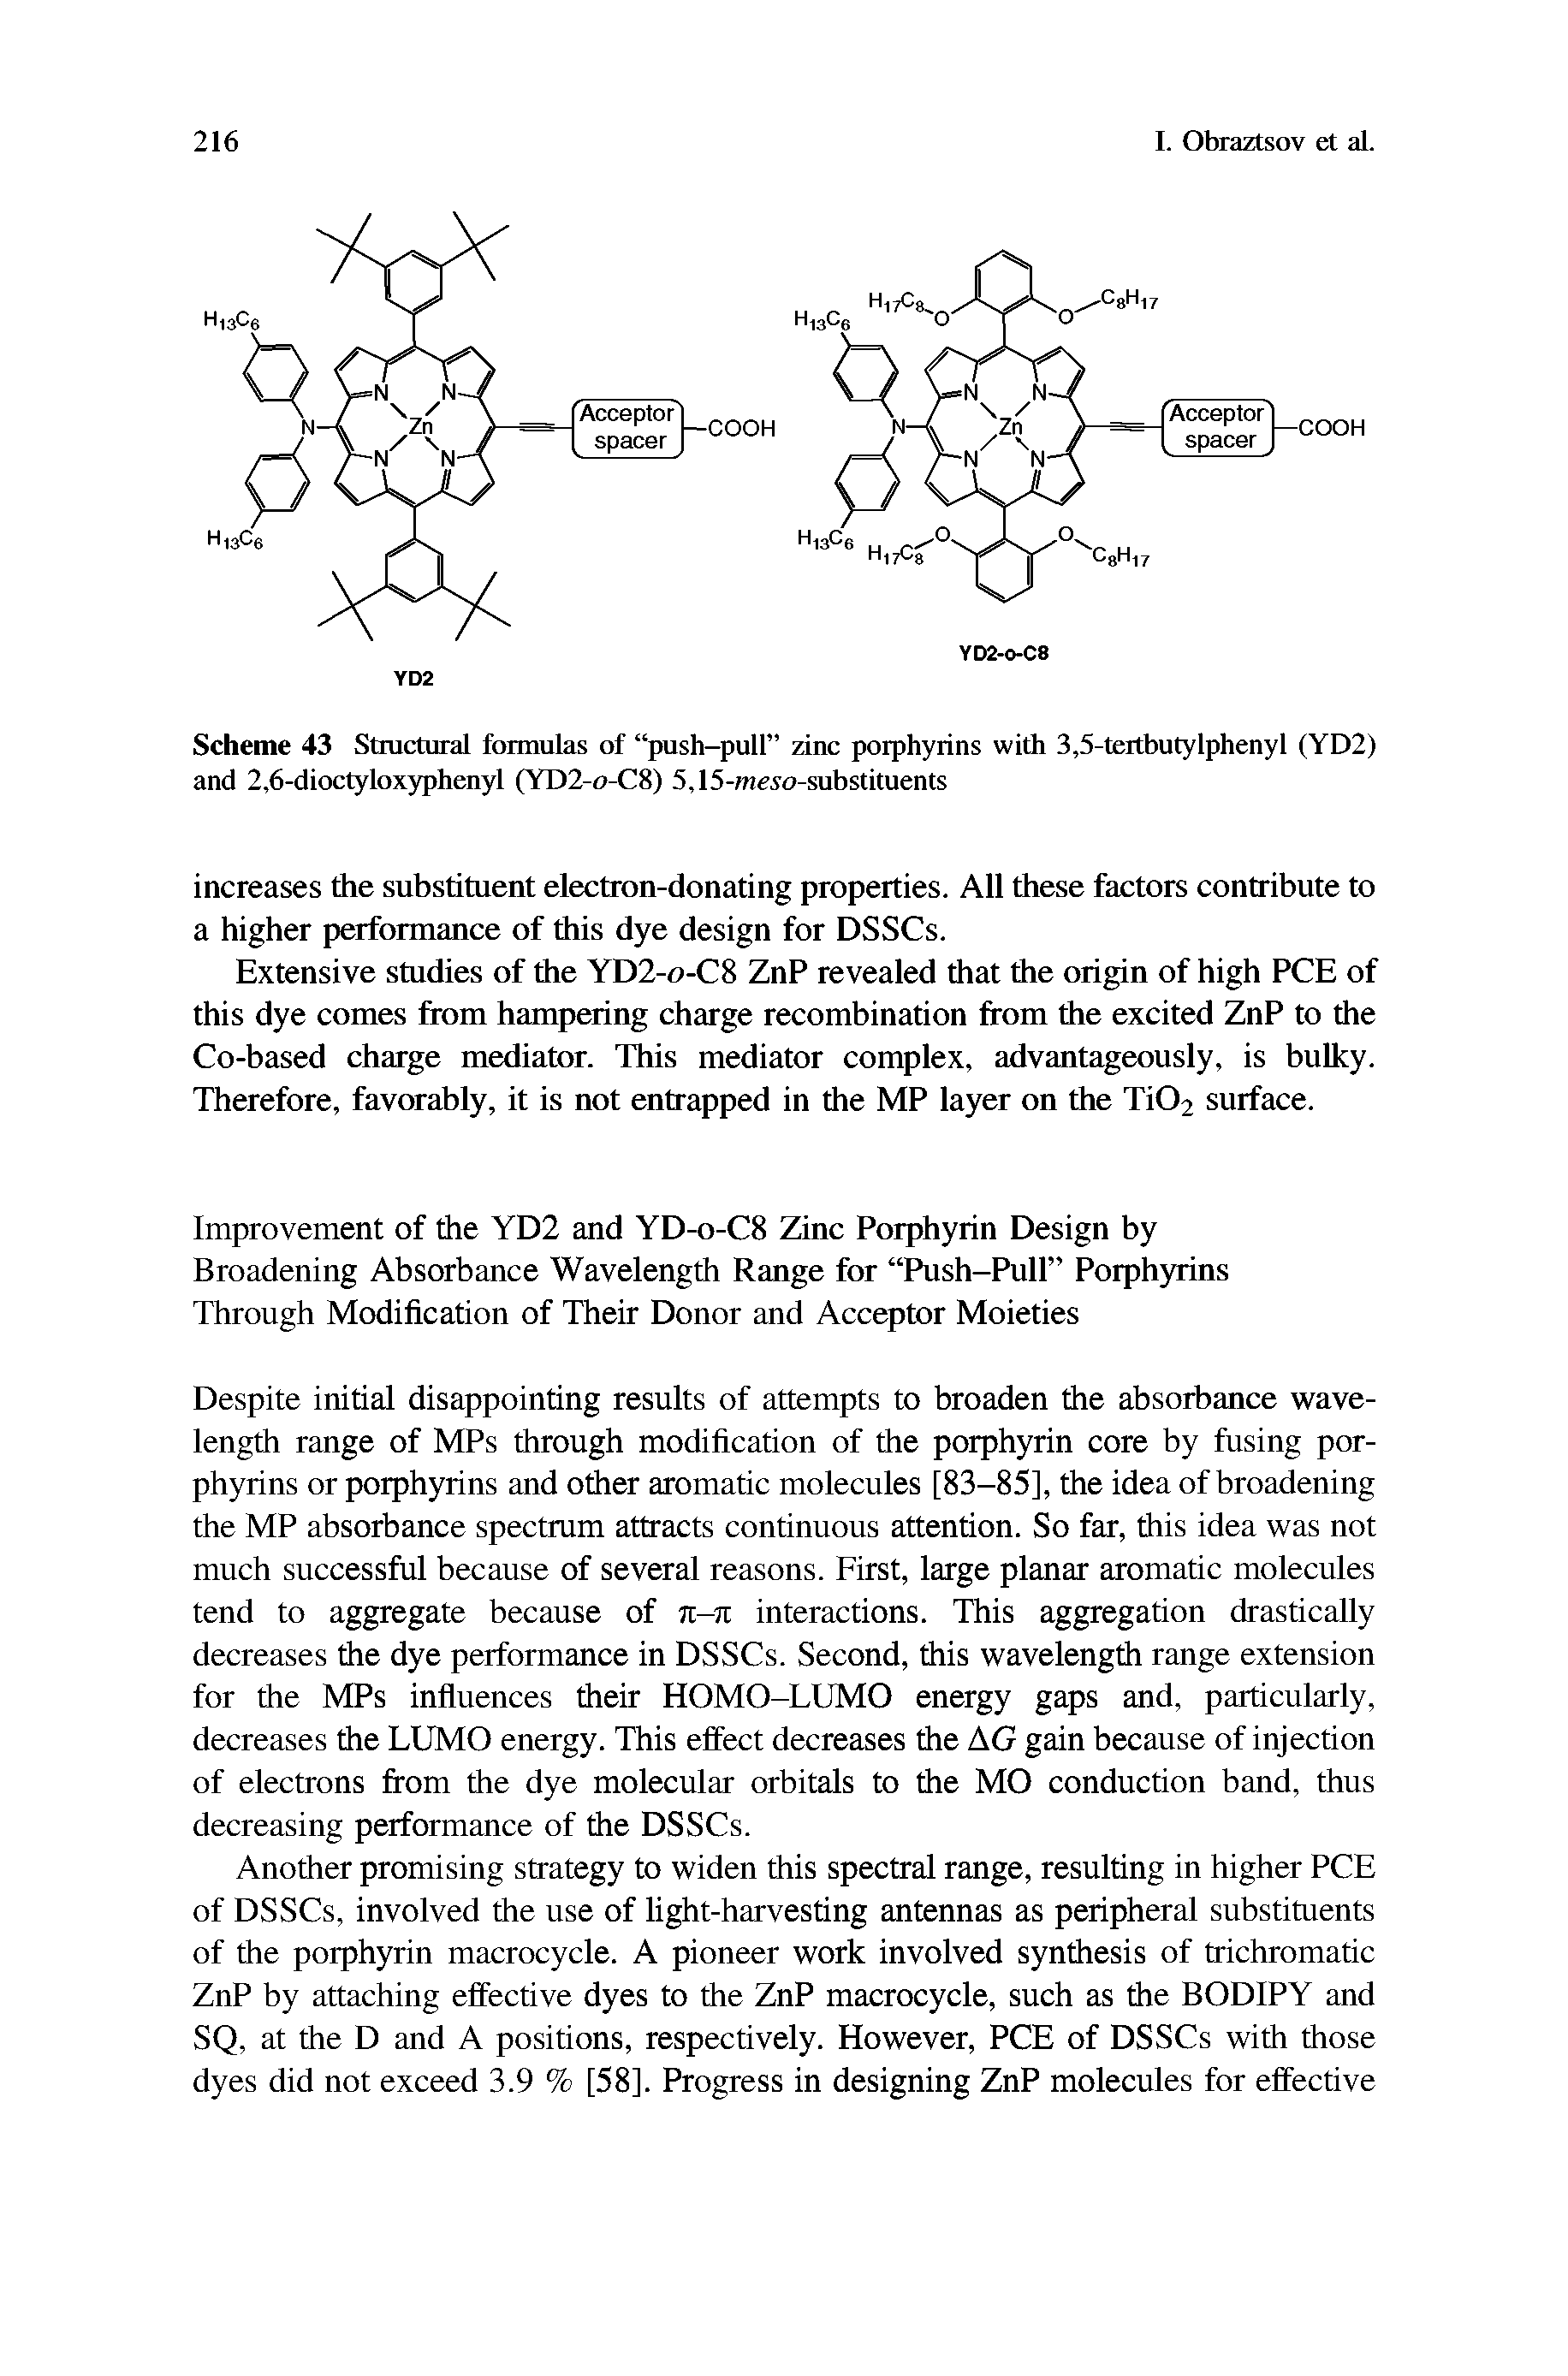 Scheme 43 Structural formulas of push-pull zinc porphyrins with 3,5-teitbutylphenyl (YD2) and 2,6-dioctyloxyphenyl (YD2-0-C8) 5,15-meso-substituents...